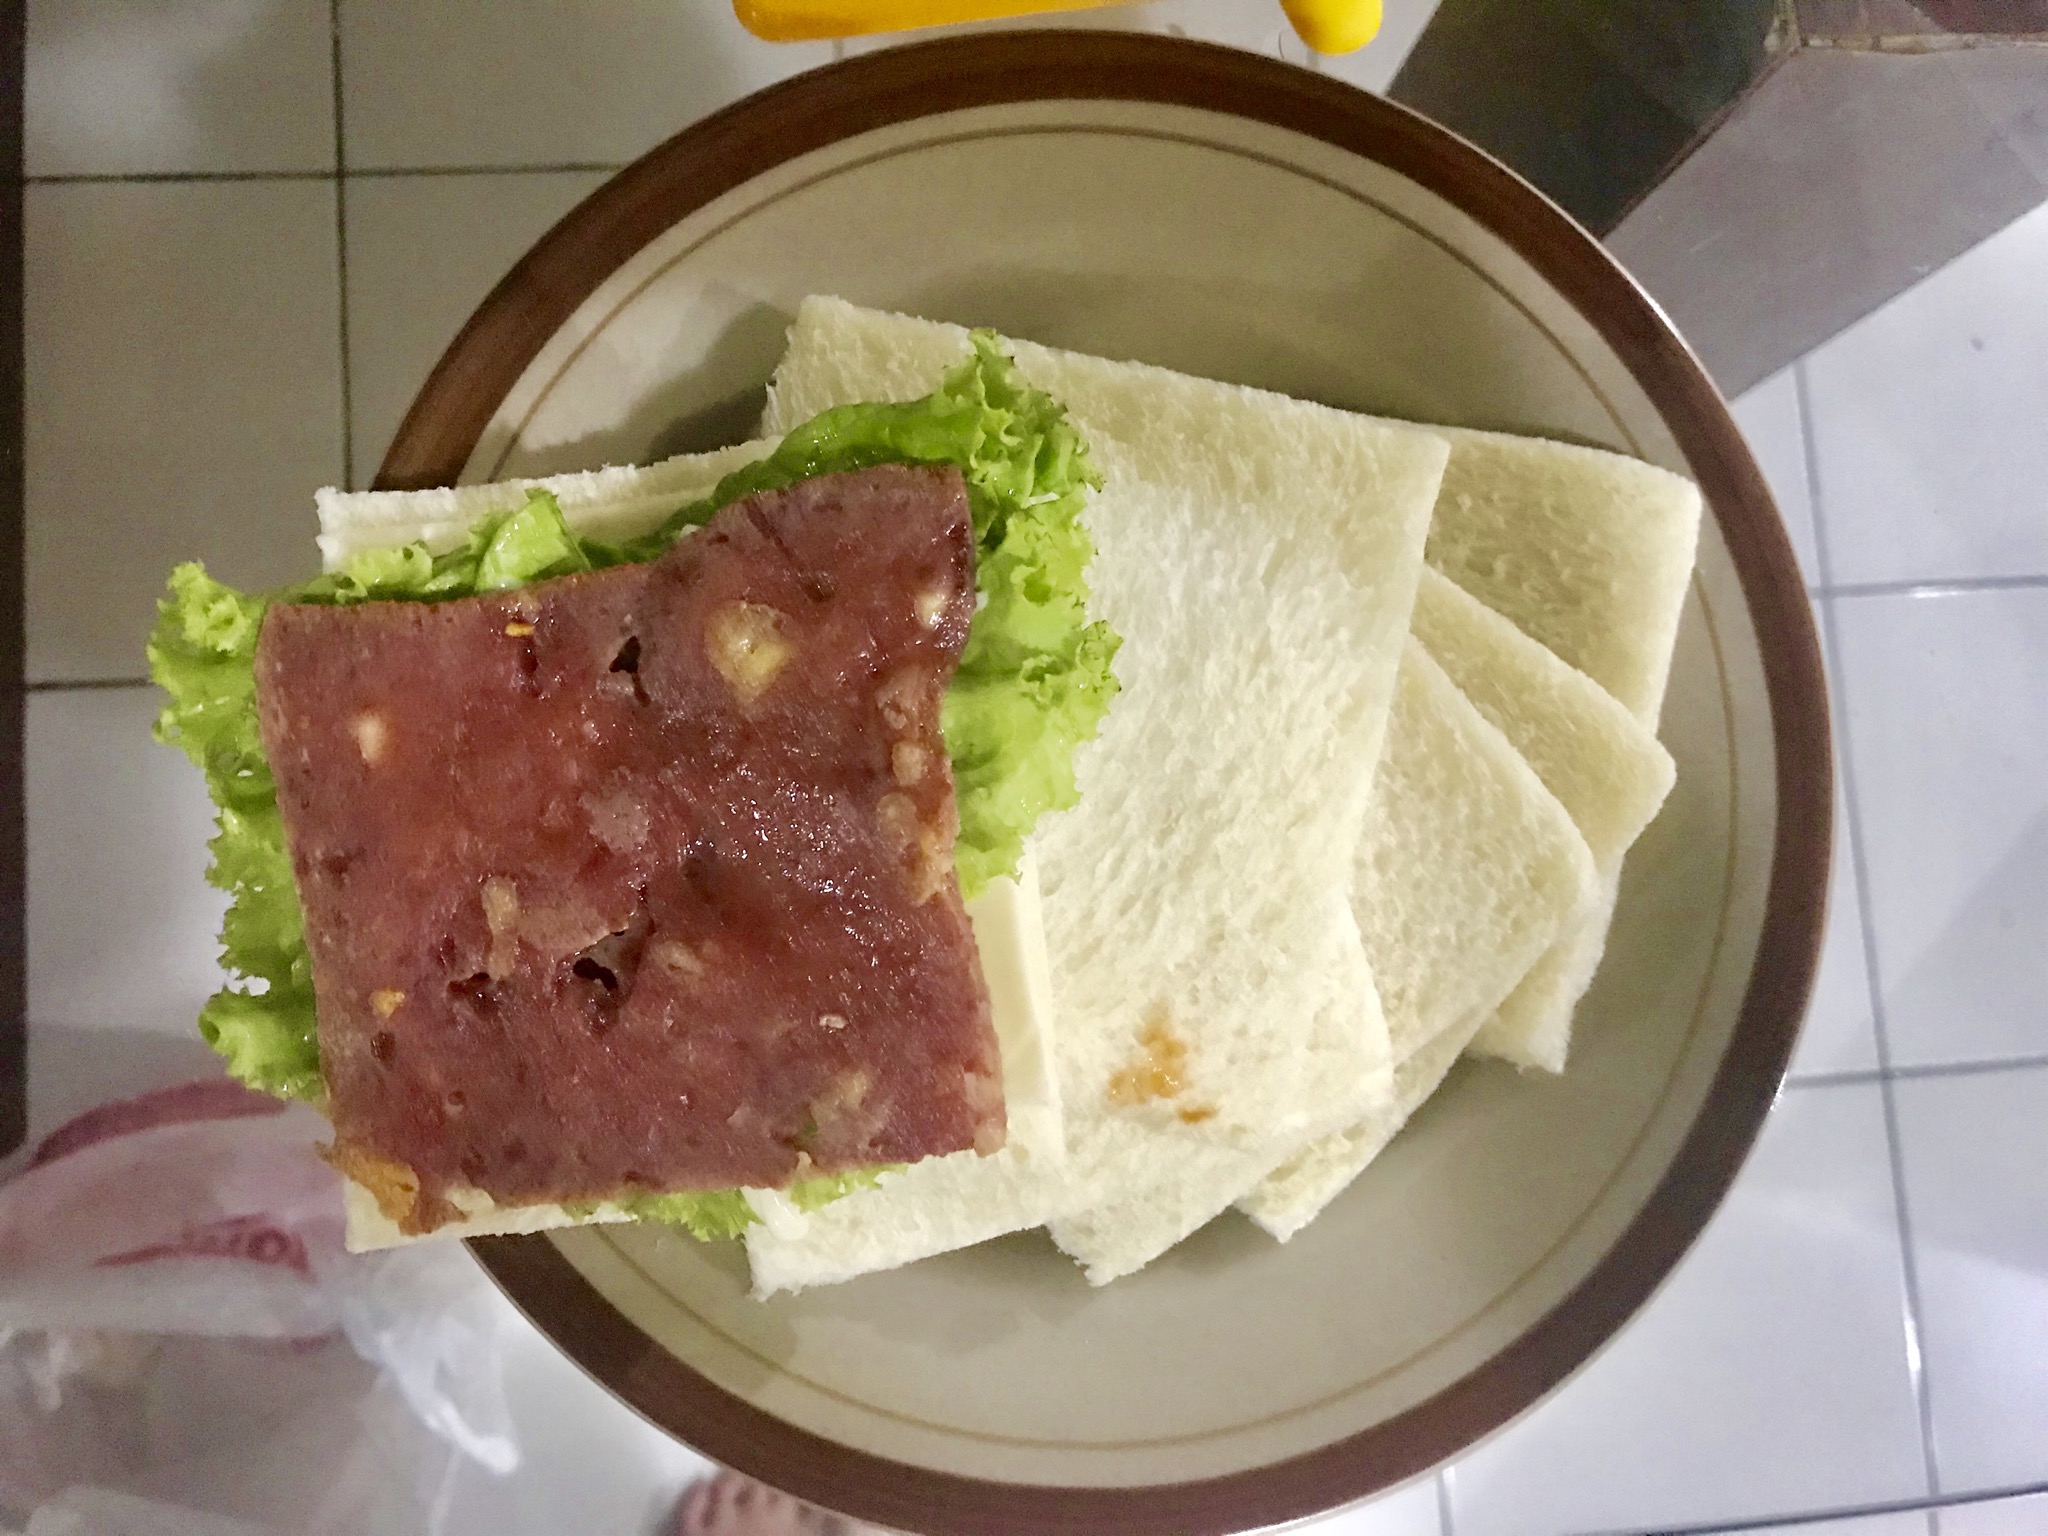 Resep deCODE: Ham and Cheese Sandwich